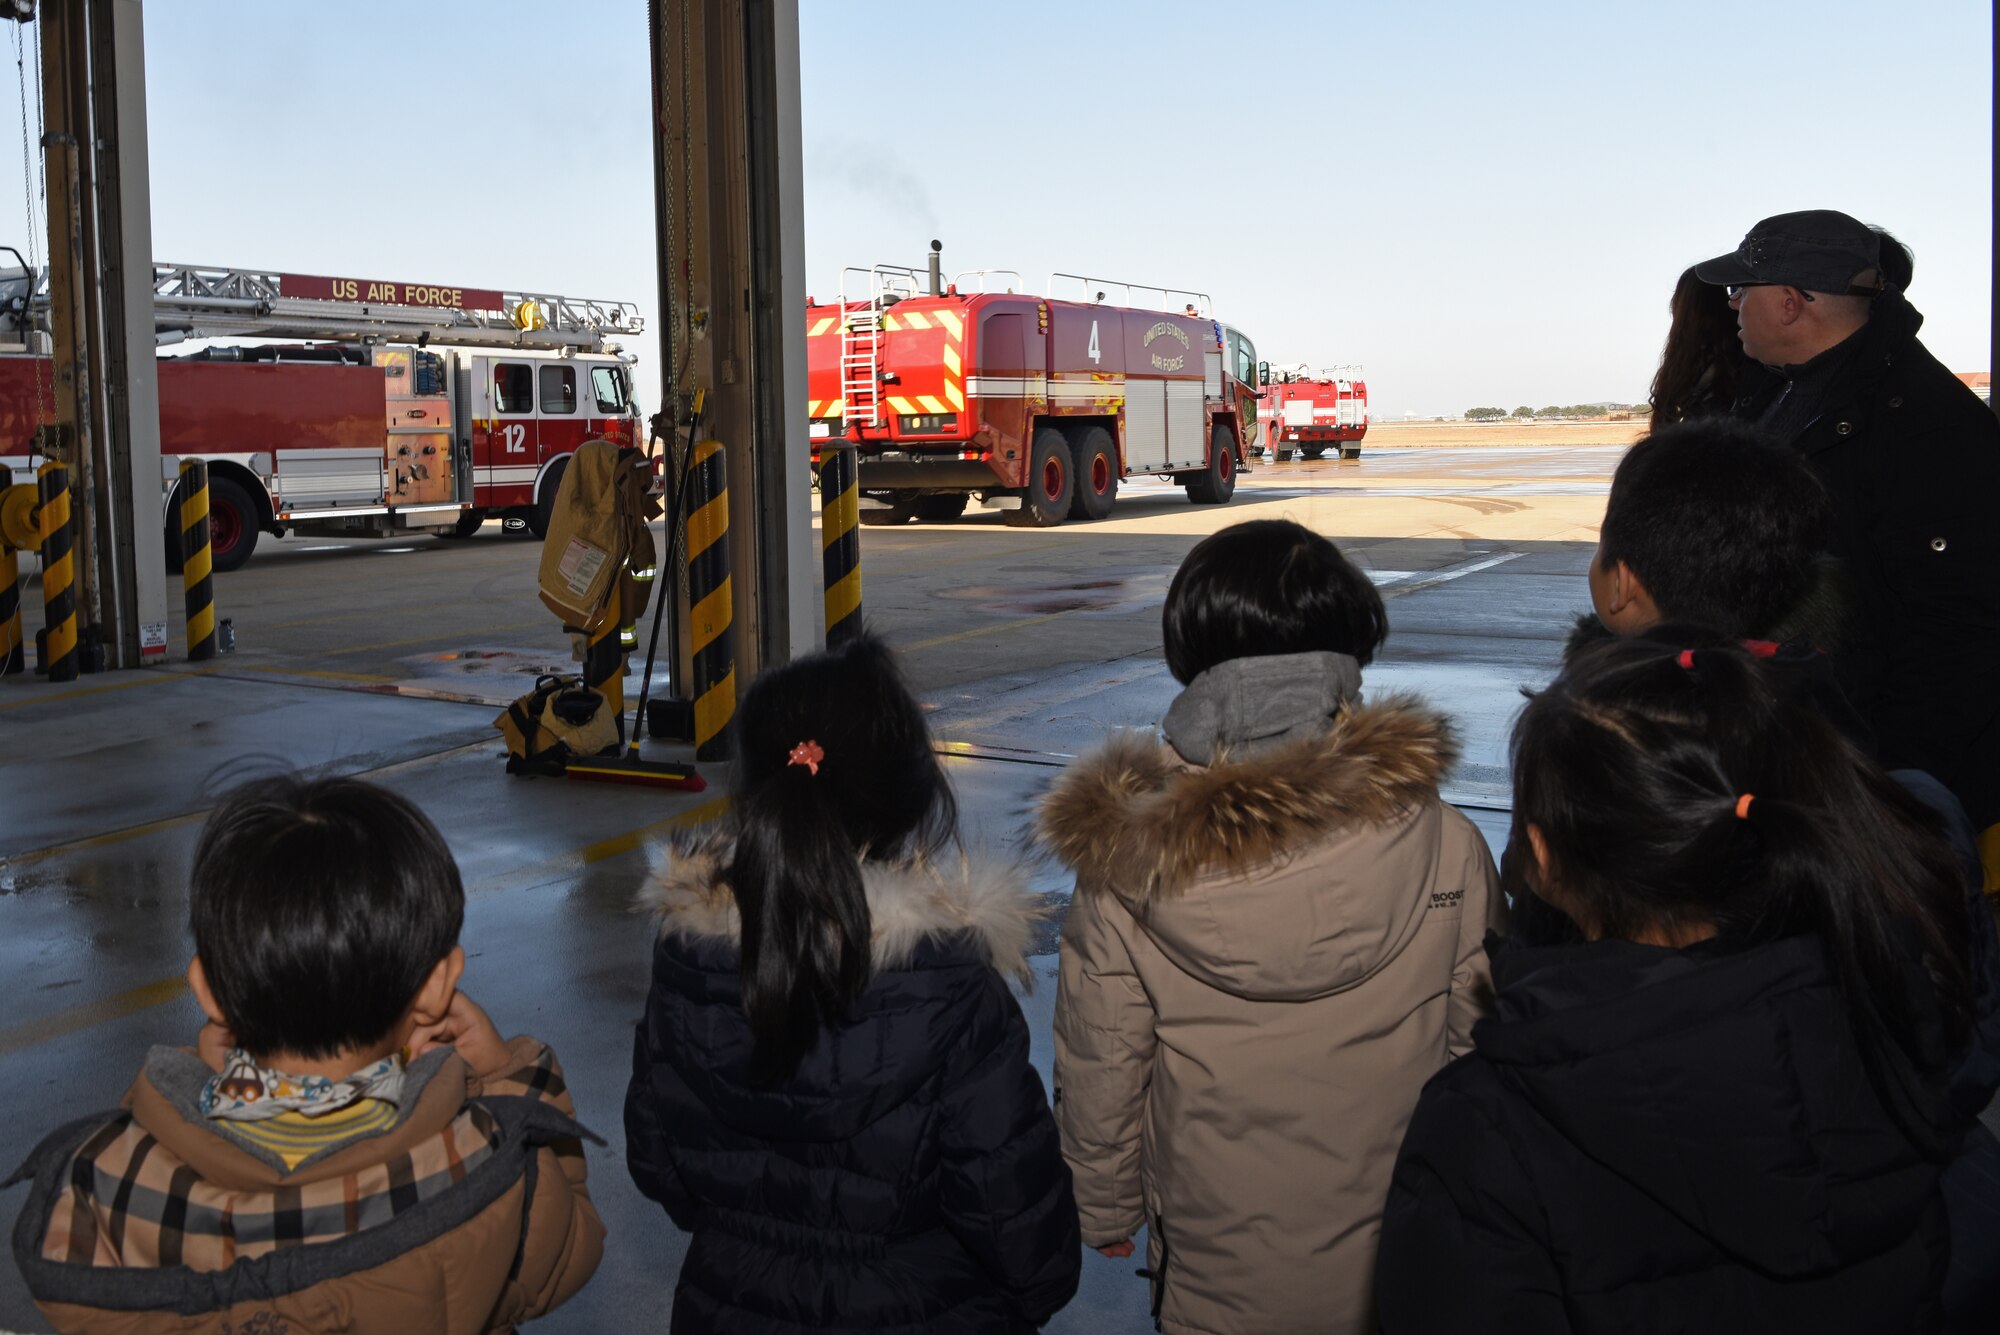 Korean Christian International School students and teachers watch 8th Civil Engineer Squadron firefighters respond to a call at Kunsan Air Base, Republic of Korea, Nov. 30, 2018. The firefighters reacted when called to assist an F-16 Fighting Falcon that needed emergency repairs. (U.S. Air Force photo by Staff Sgt. Joshua Edwards)